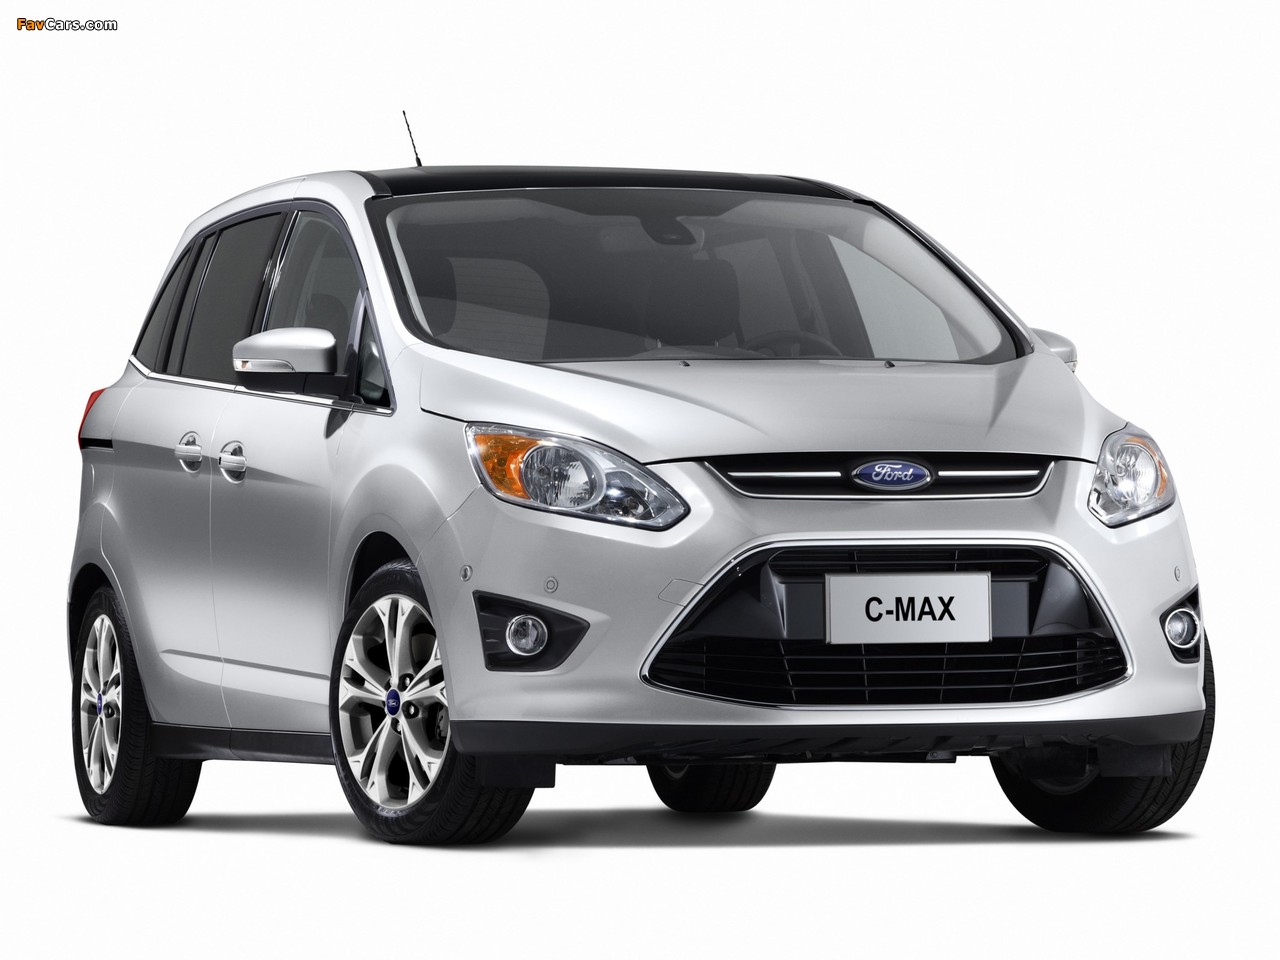 Ford Grand C-MAX 2010 pictures (1280 x 960)